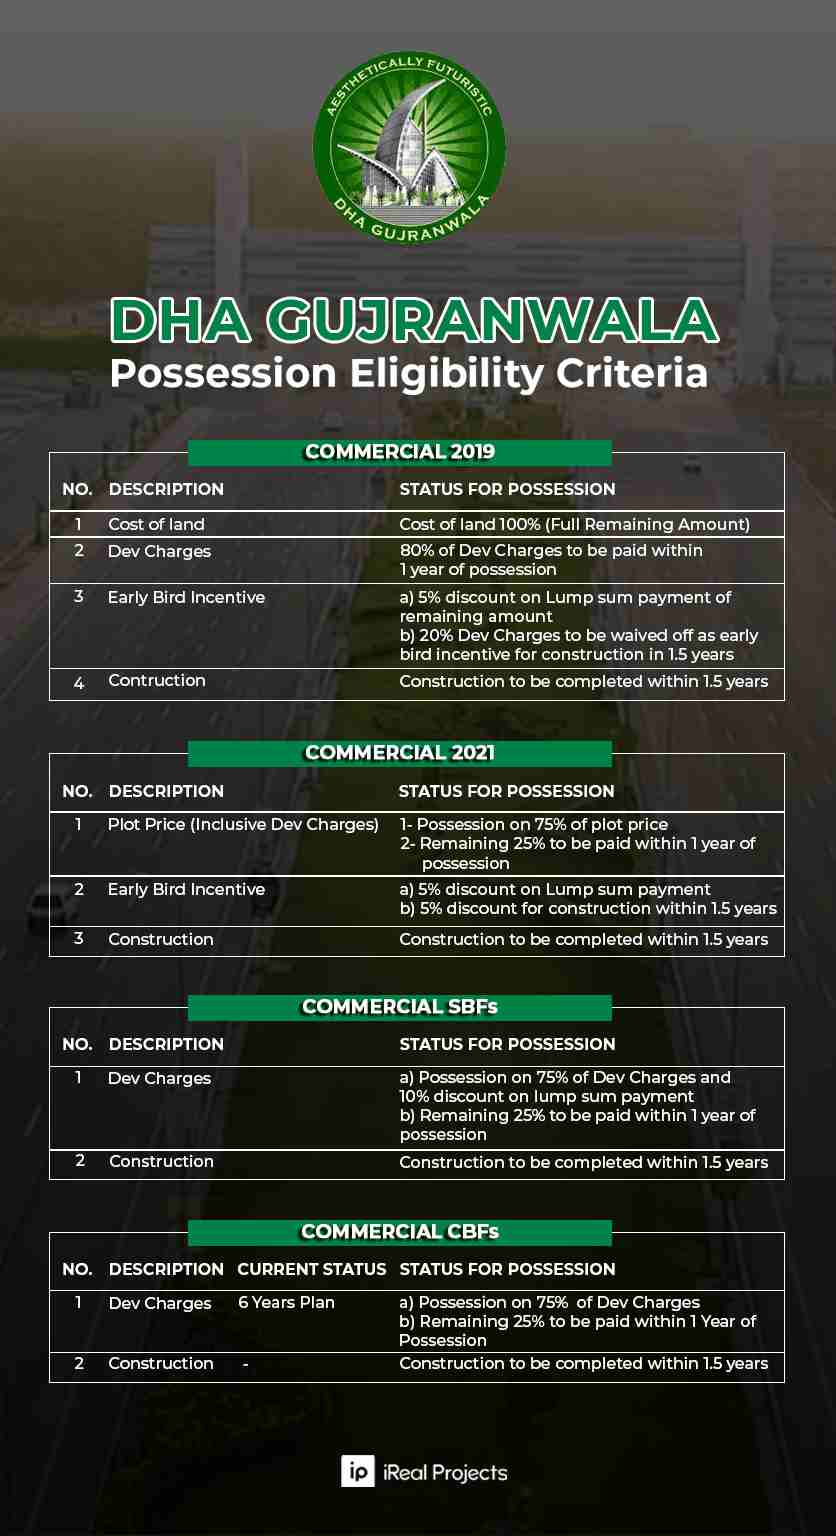 Eligibility criteria for Possession - DHA Gujranwala Possession Opening